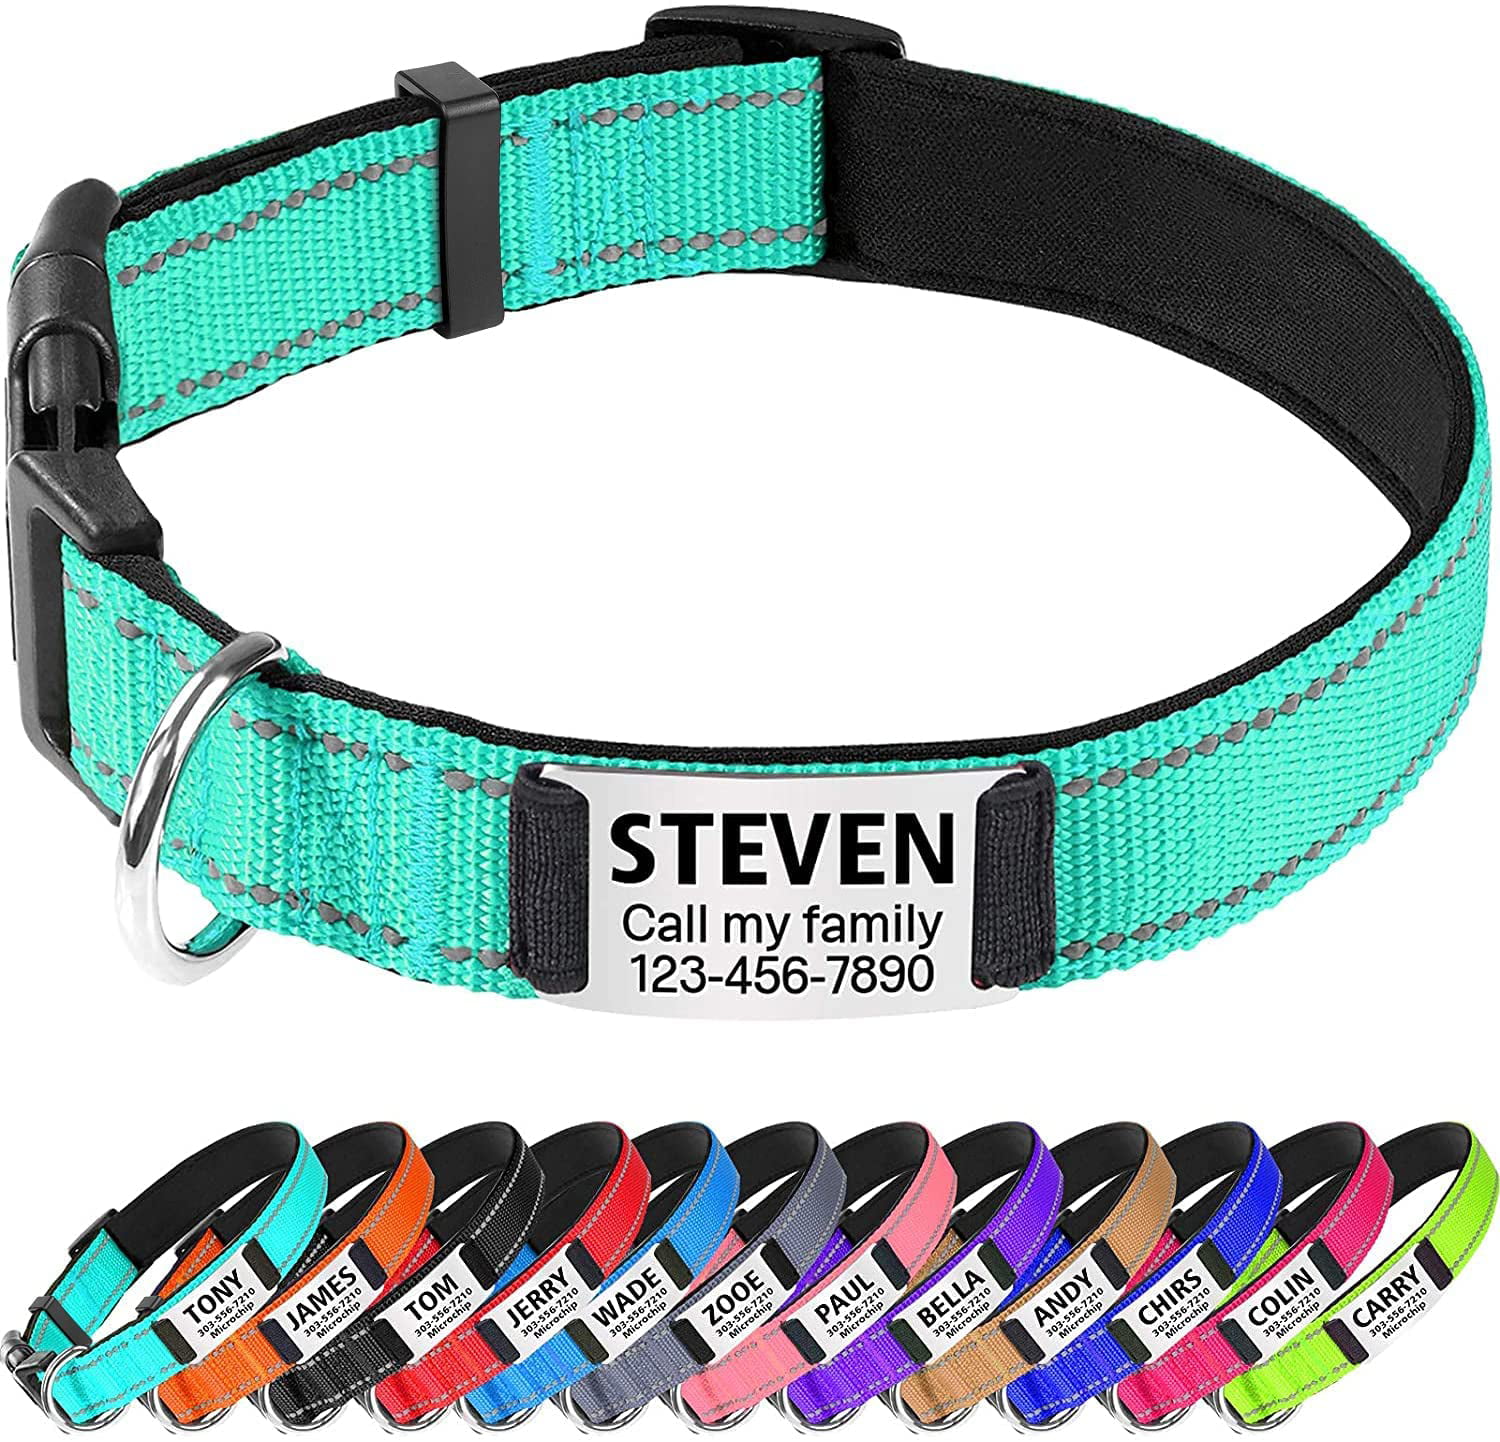 Dog Collar Custom Personalized Engraved Name and Phone Number for Puppy Small Medium Large Pets 